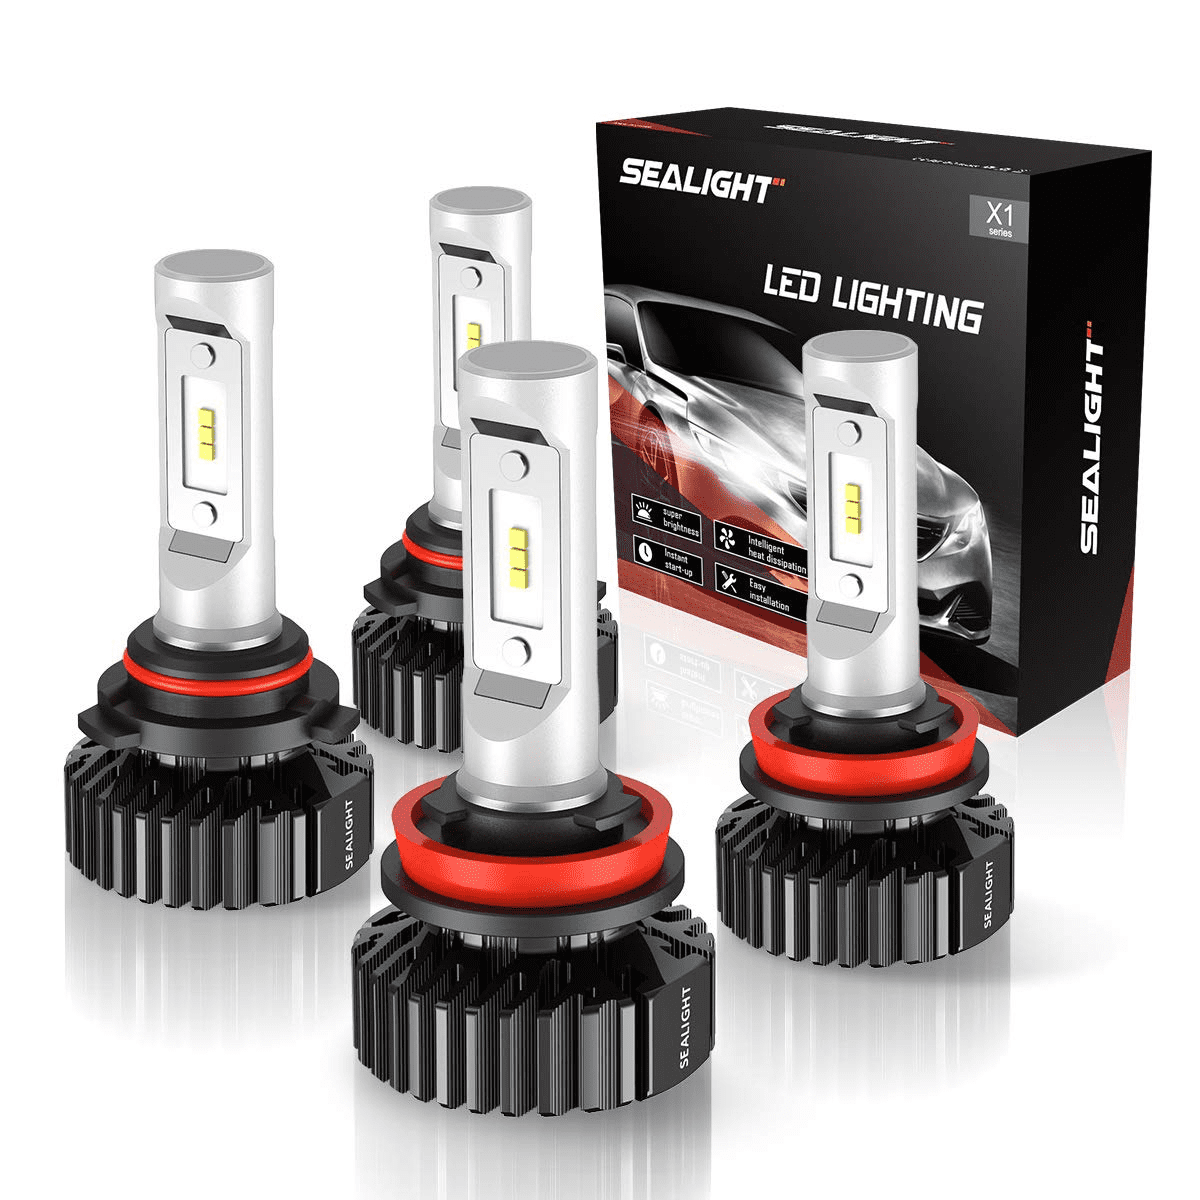 KATANA 9005 LED Headlight Bulbs,12000LM 60W 6500K Extremely Super Bright HB3 LED Bulbs All-in-One Conversion Kit of 2 Halogen Replacement 